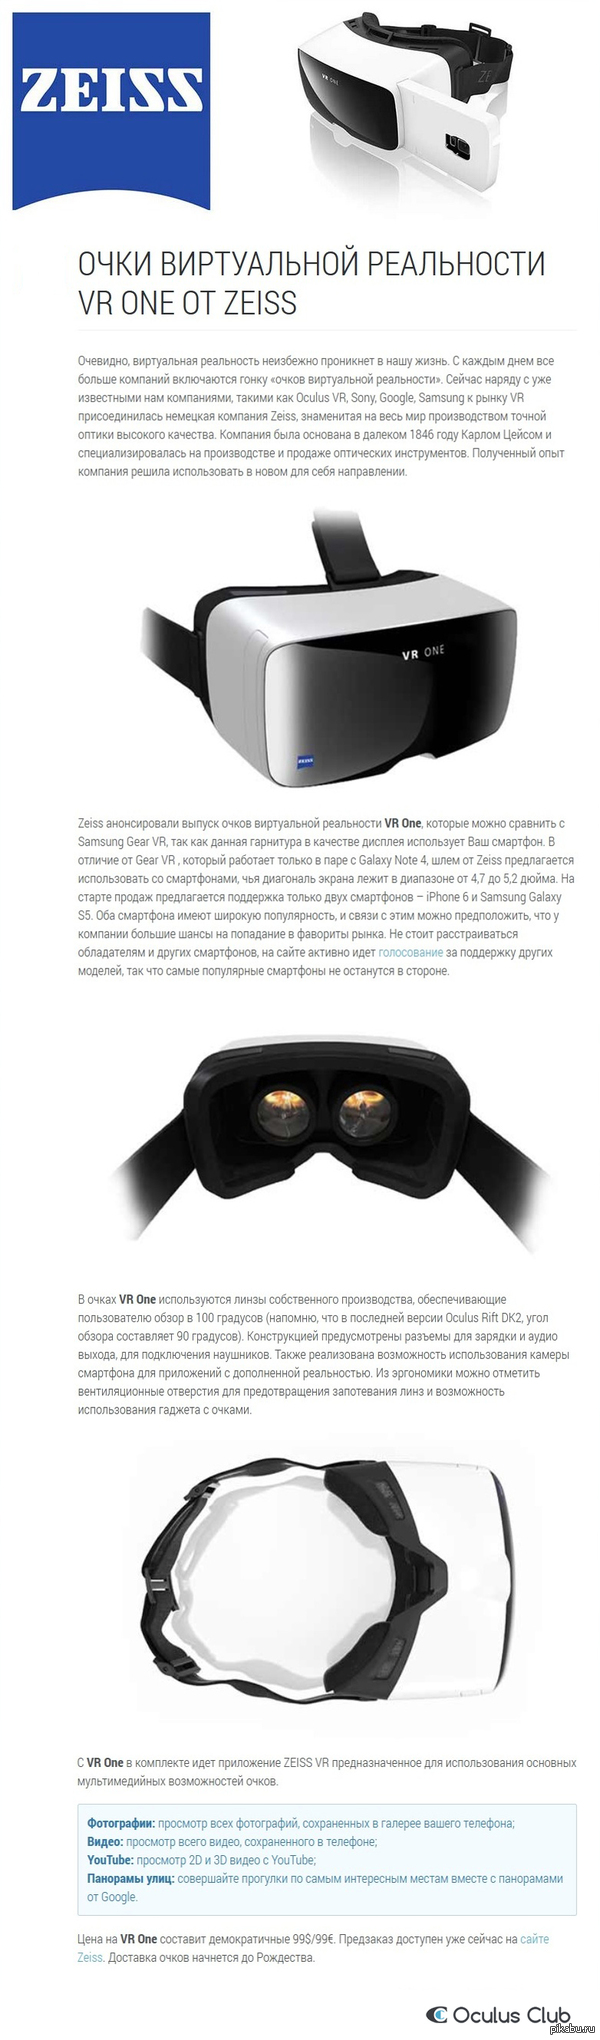    VR One  Zeiss 